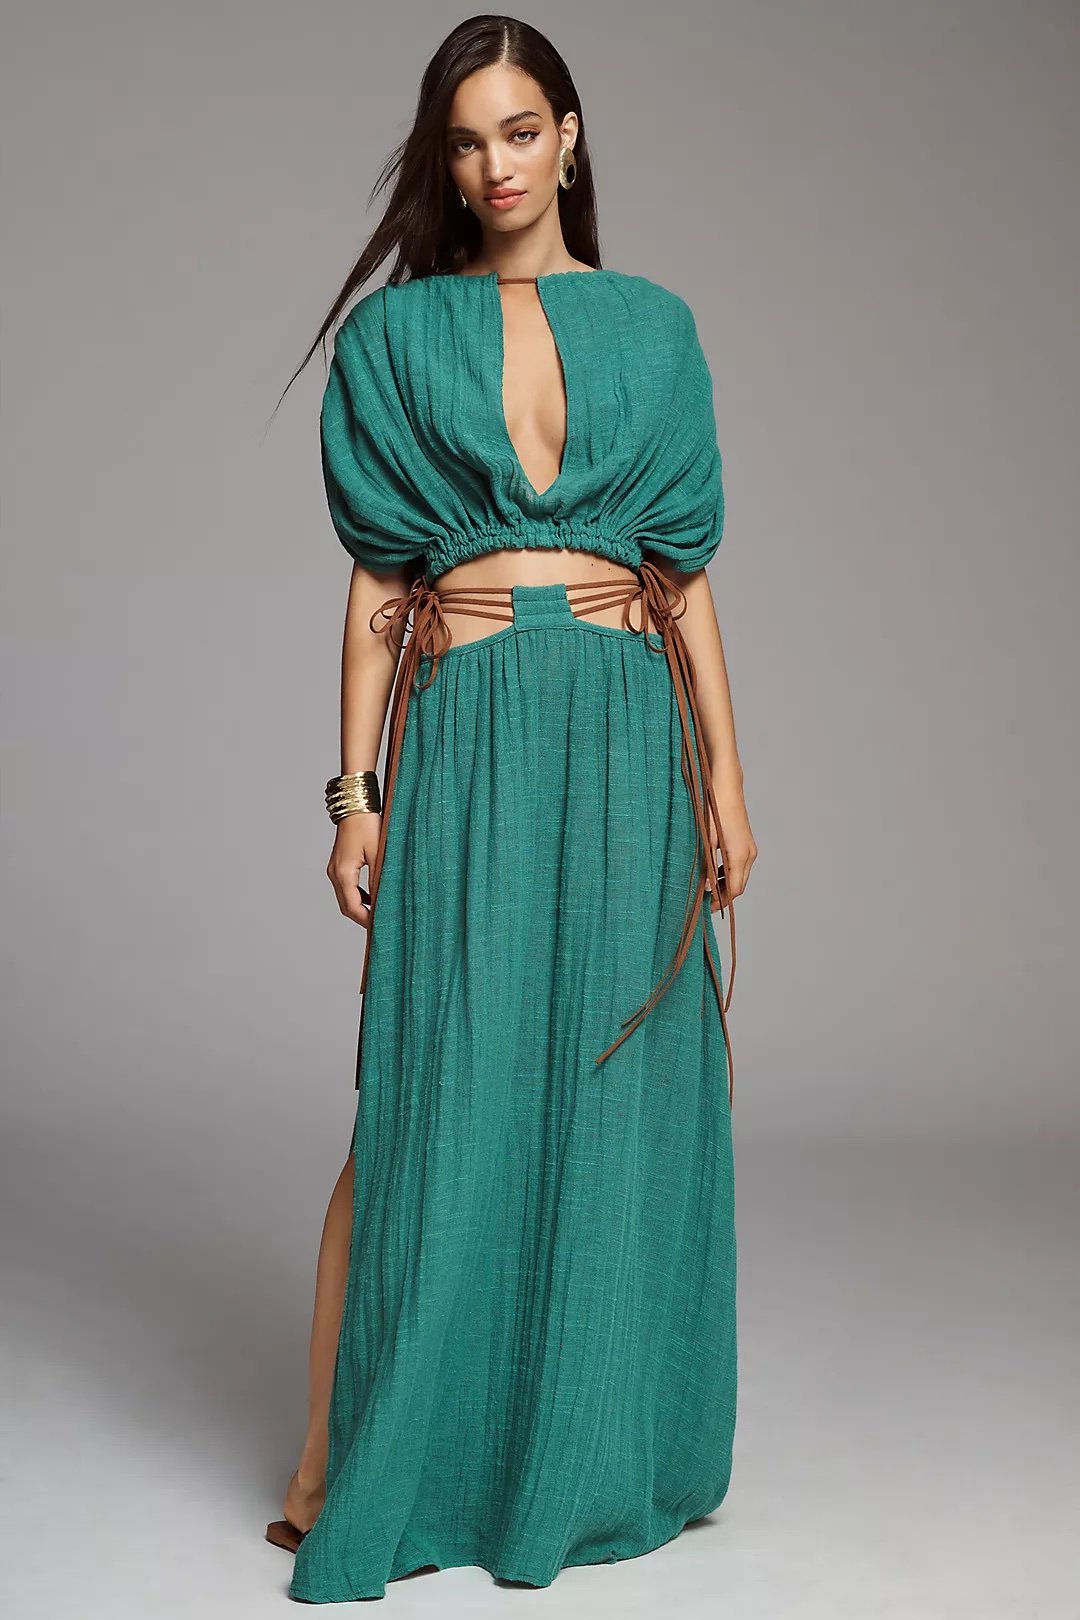 LACE The Label Tie-Waist Maxi Skirt